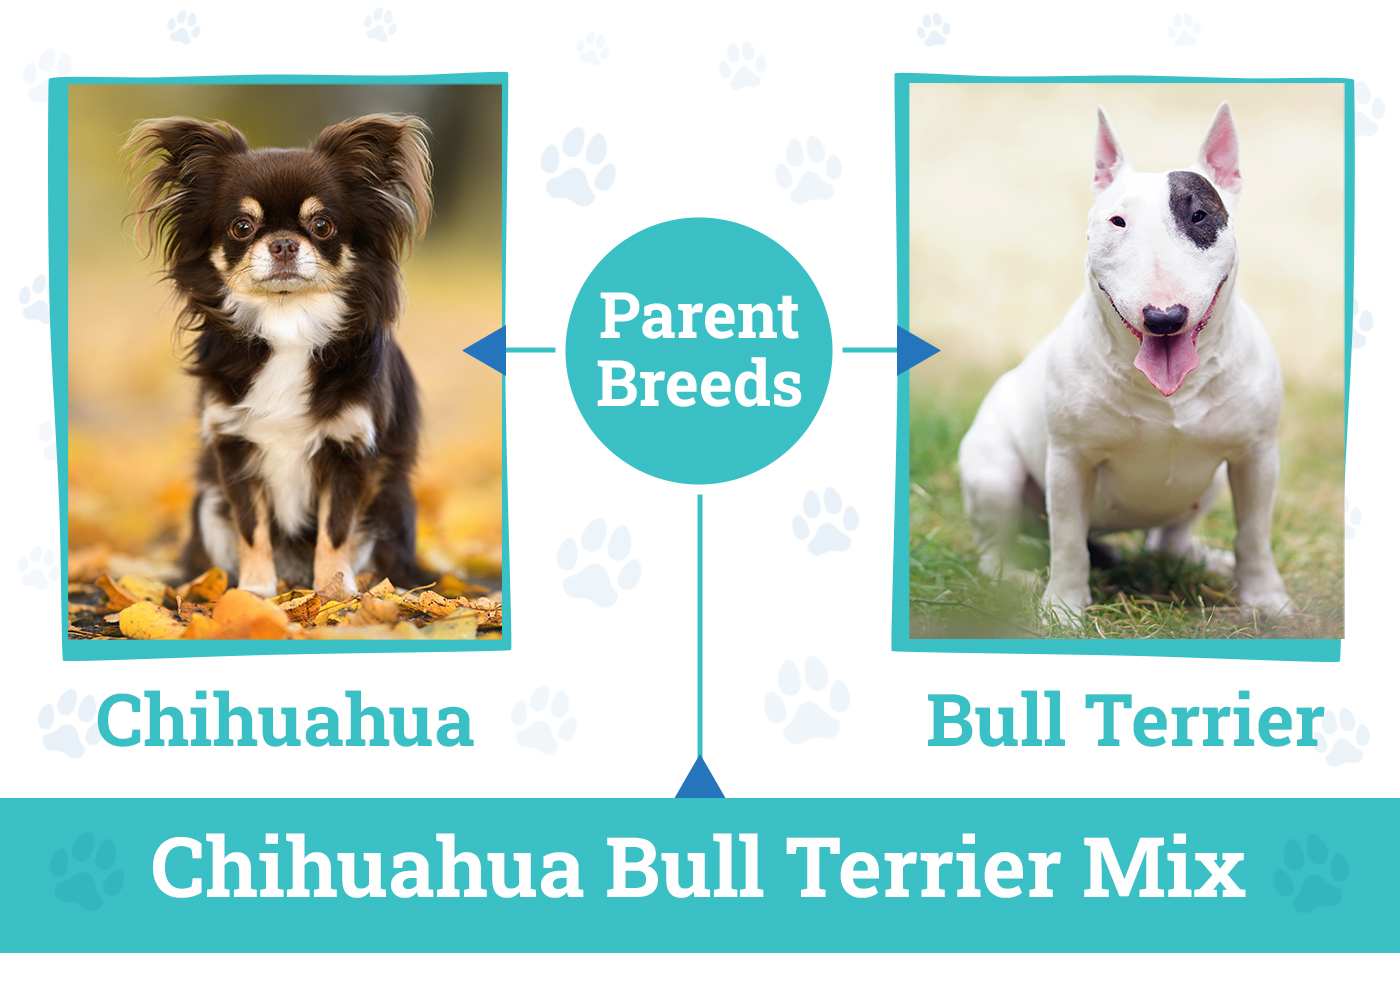 Parent Breeds of the Chihuahua Bull Terrier Mix